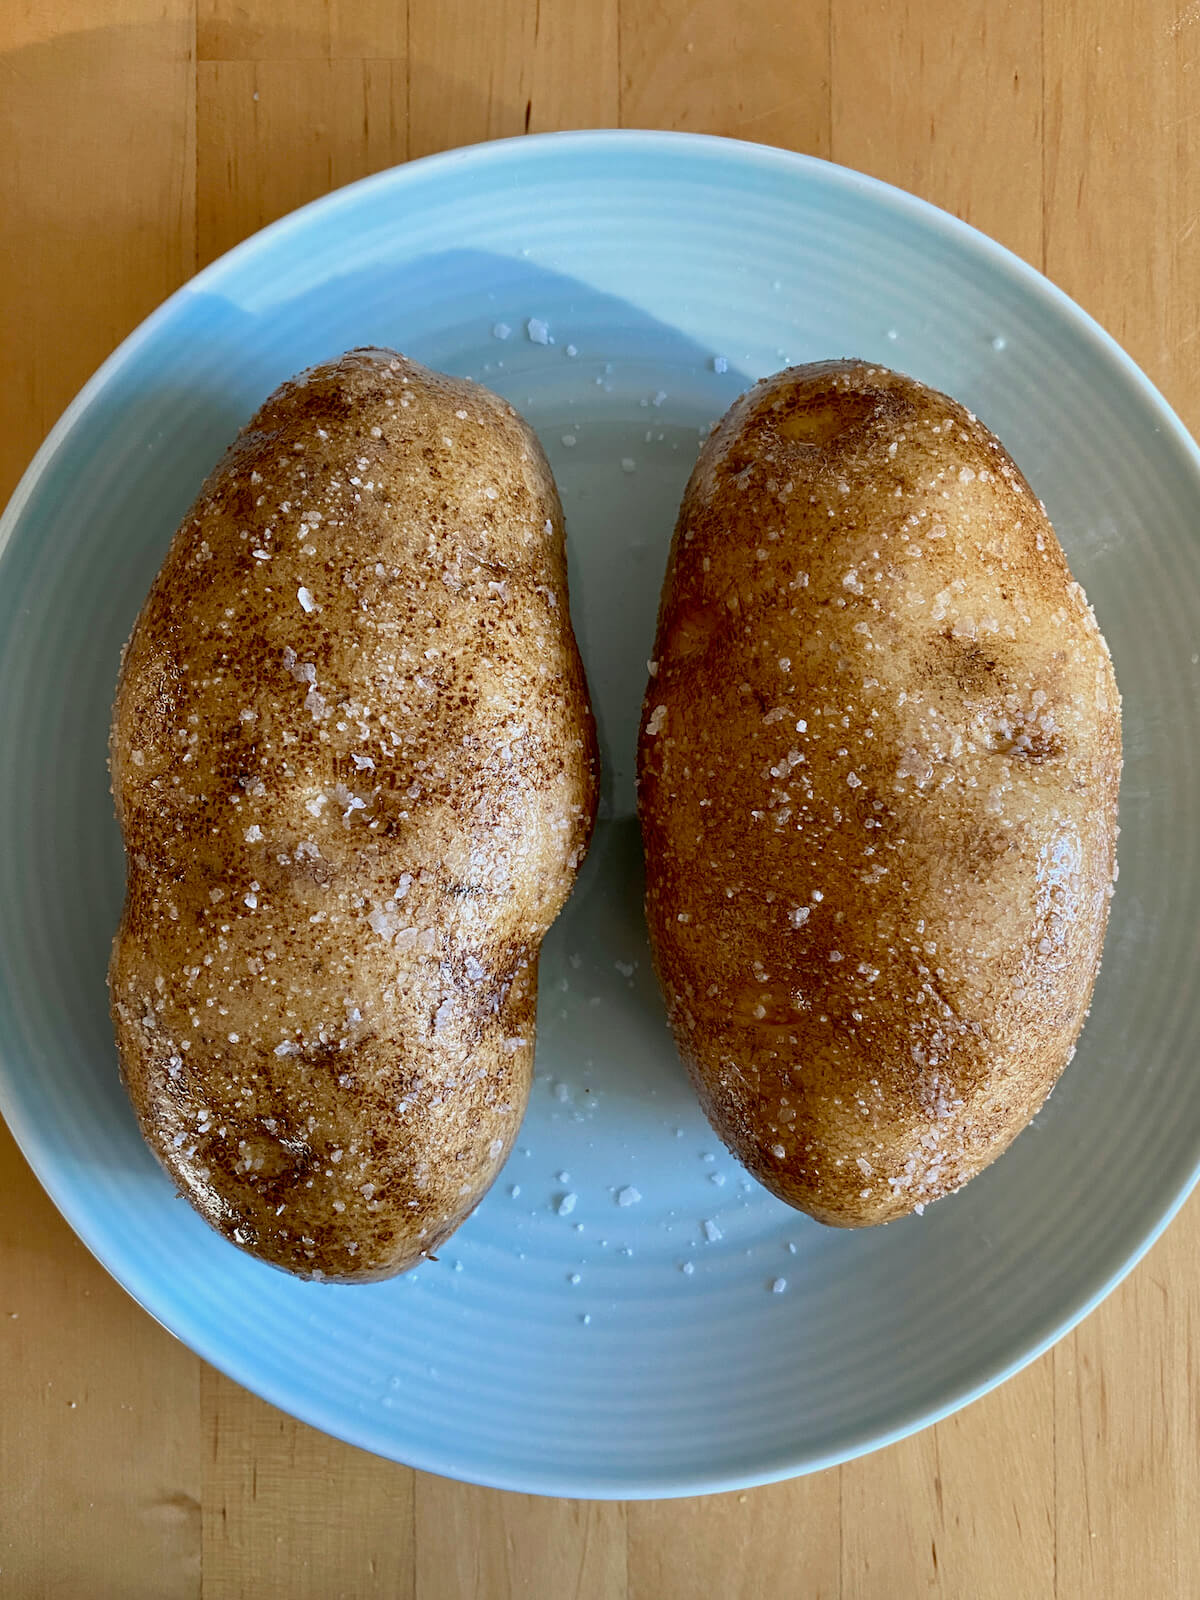 Two raw russet potatoes seasoned with olive oil and salt on a light blue plate.